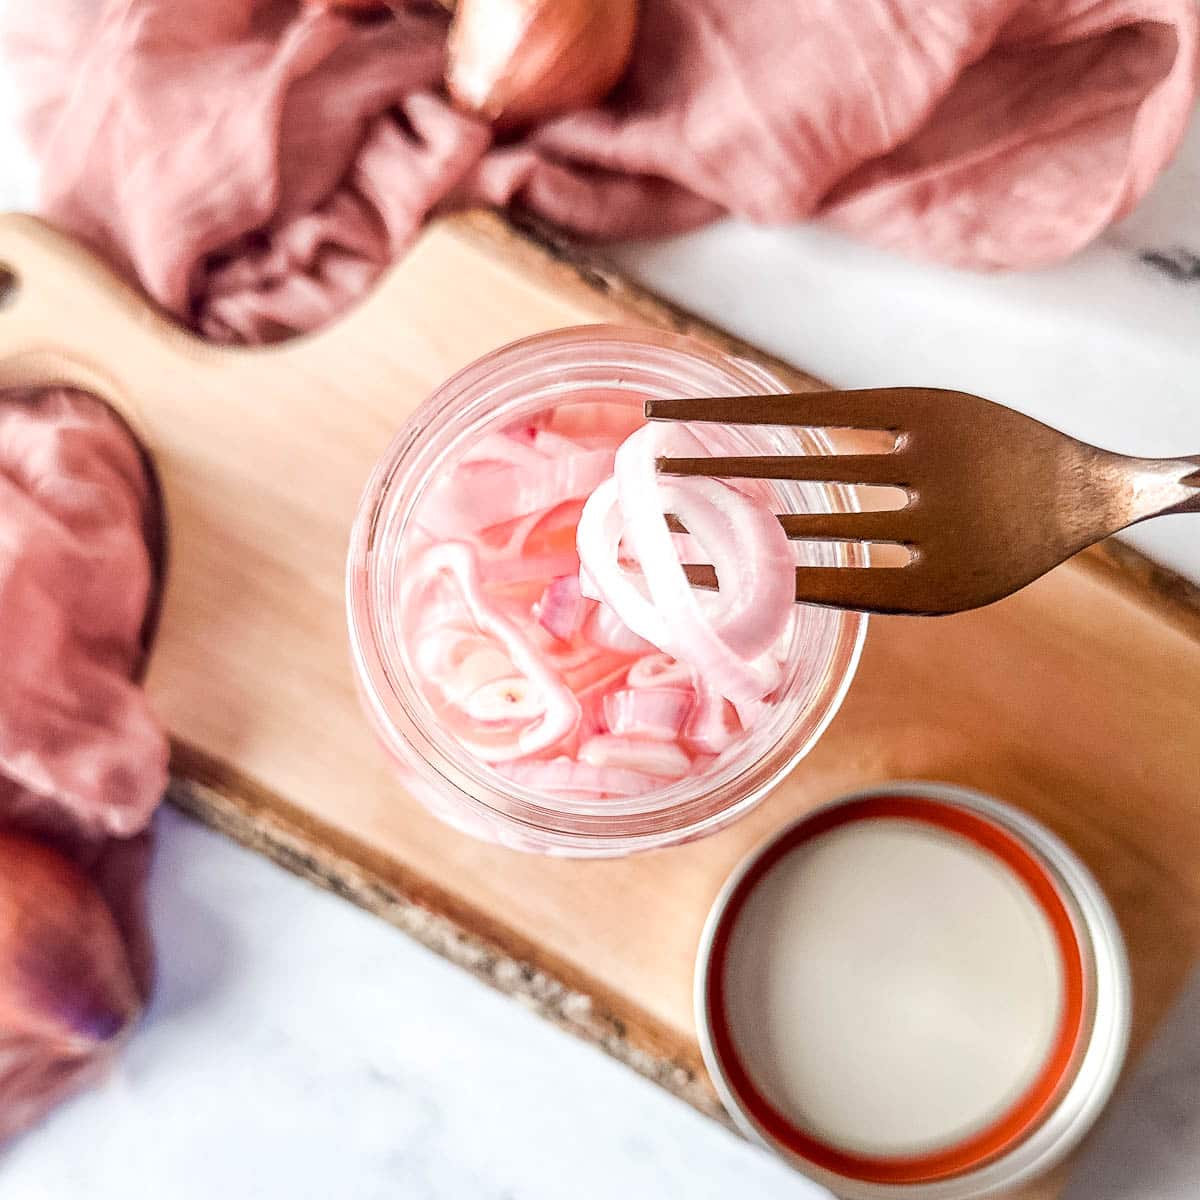 A few slices on quick pickled shallots are held over a jar with a copper-colored fork.